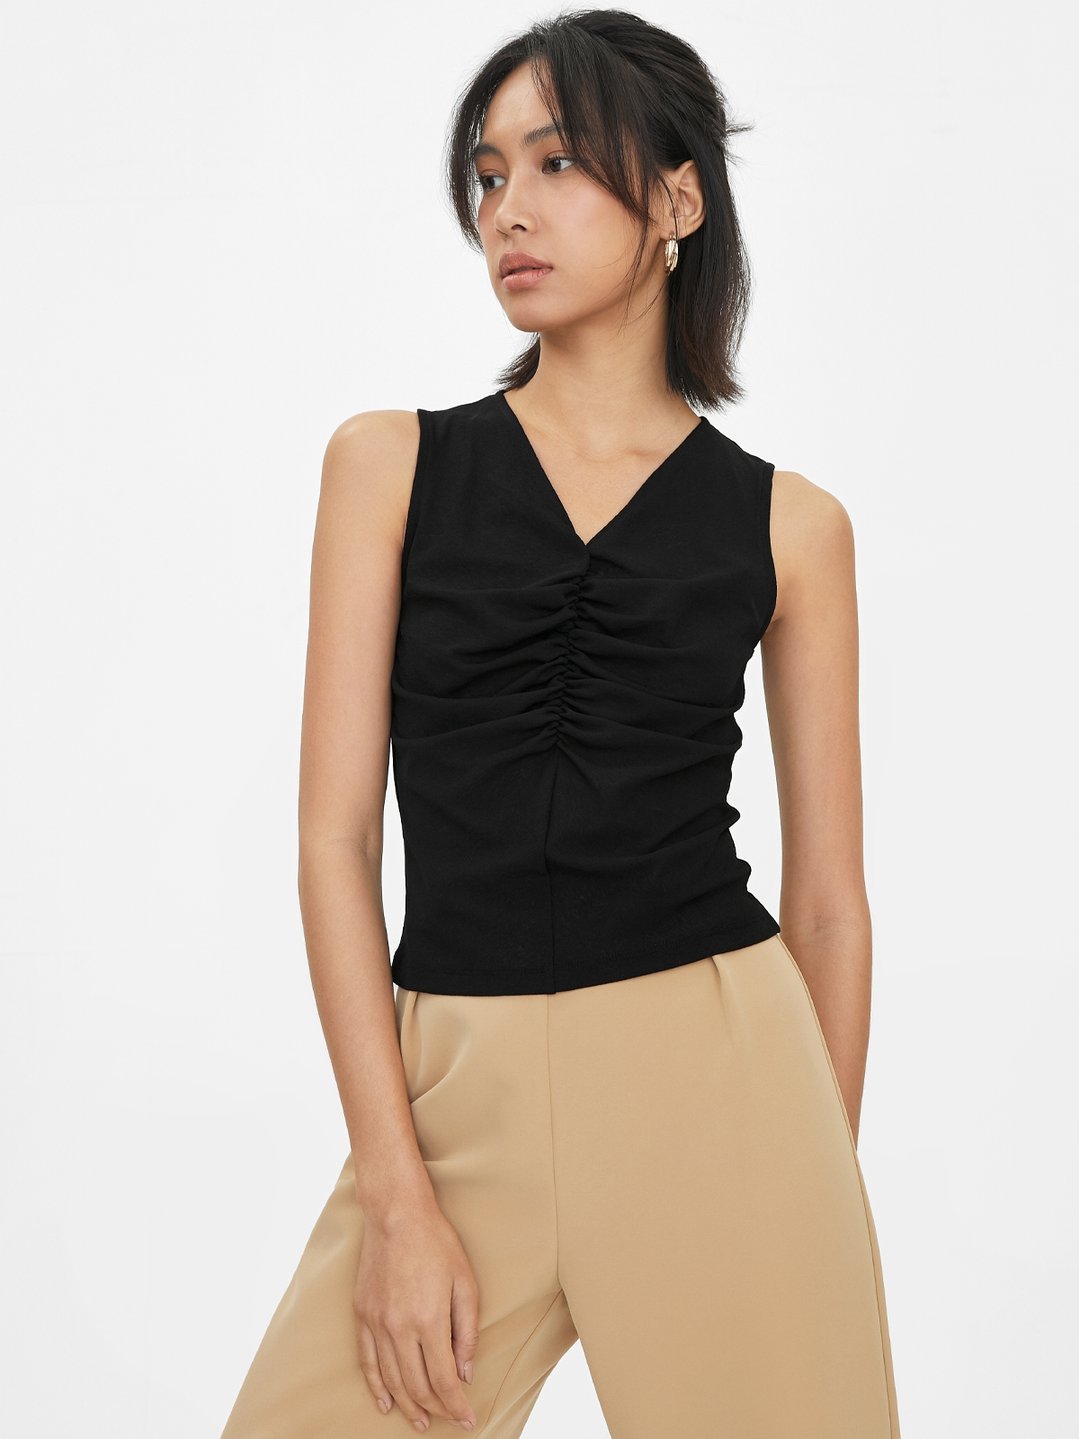 Ruched Sleeveless Top - Black - Pomelo Fashion